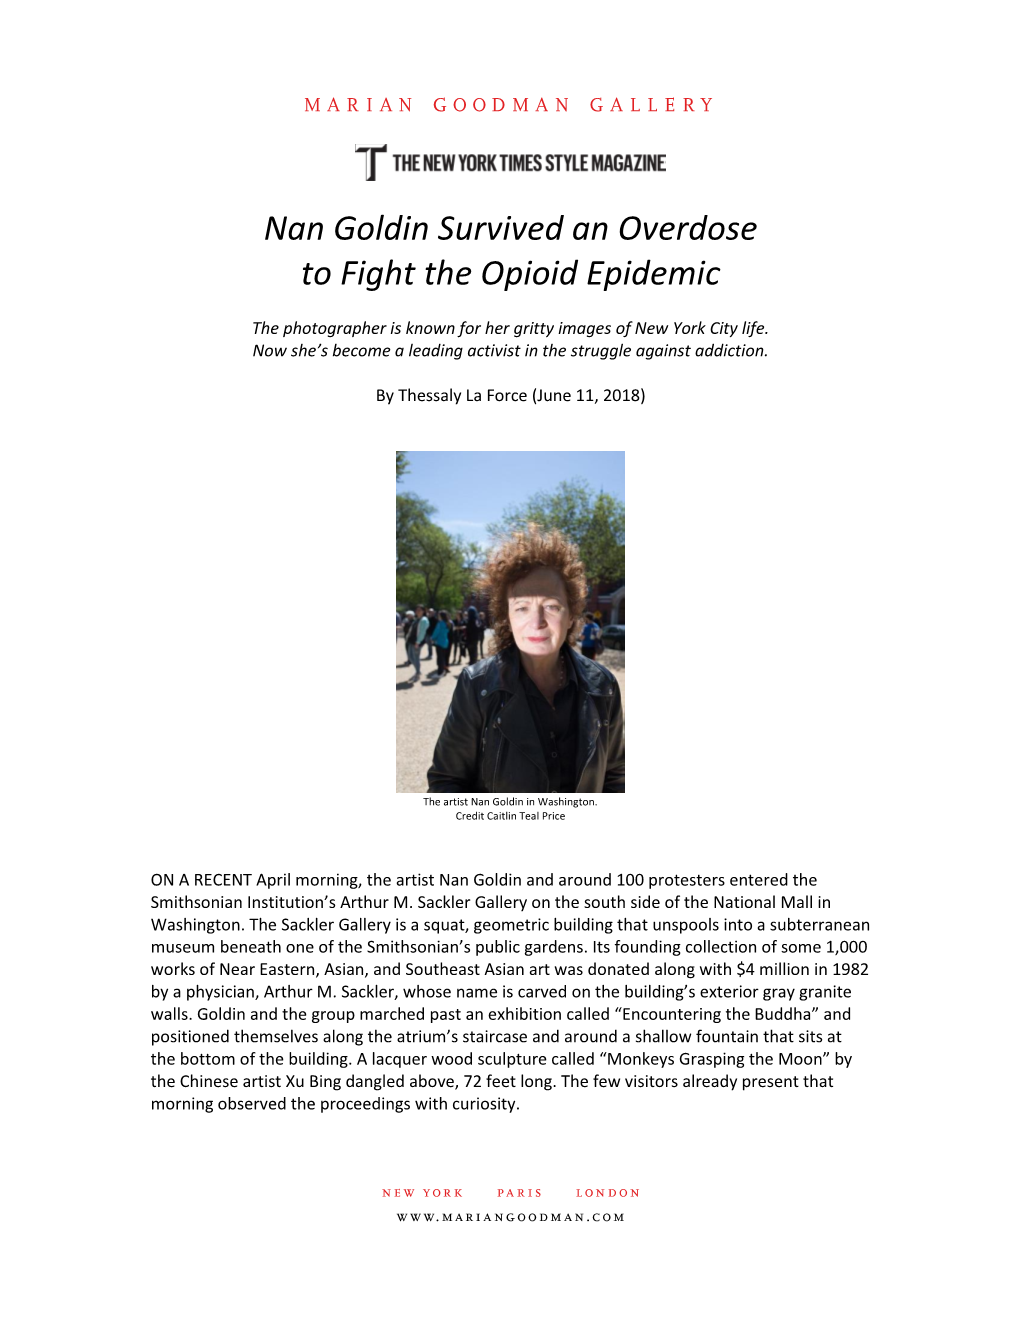 Press Nan Goldin Survived an Overdose to Fight the Opioid